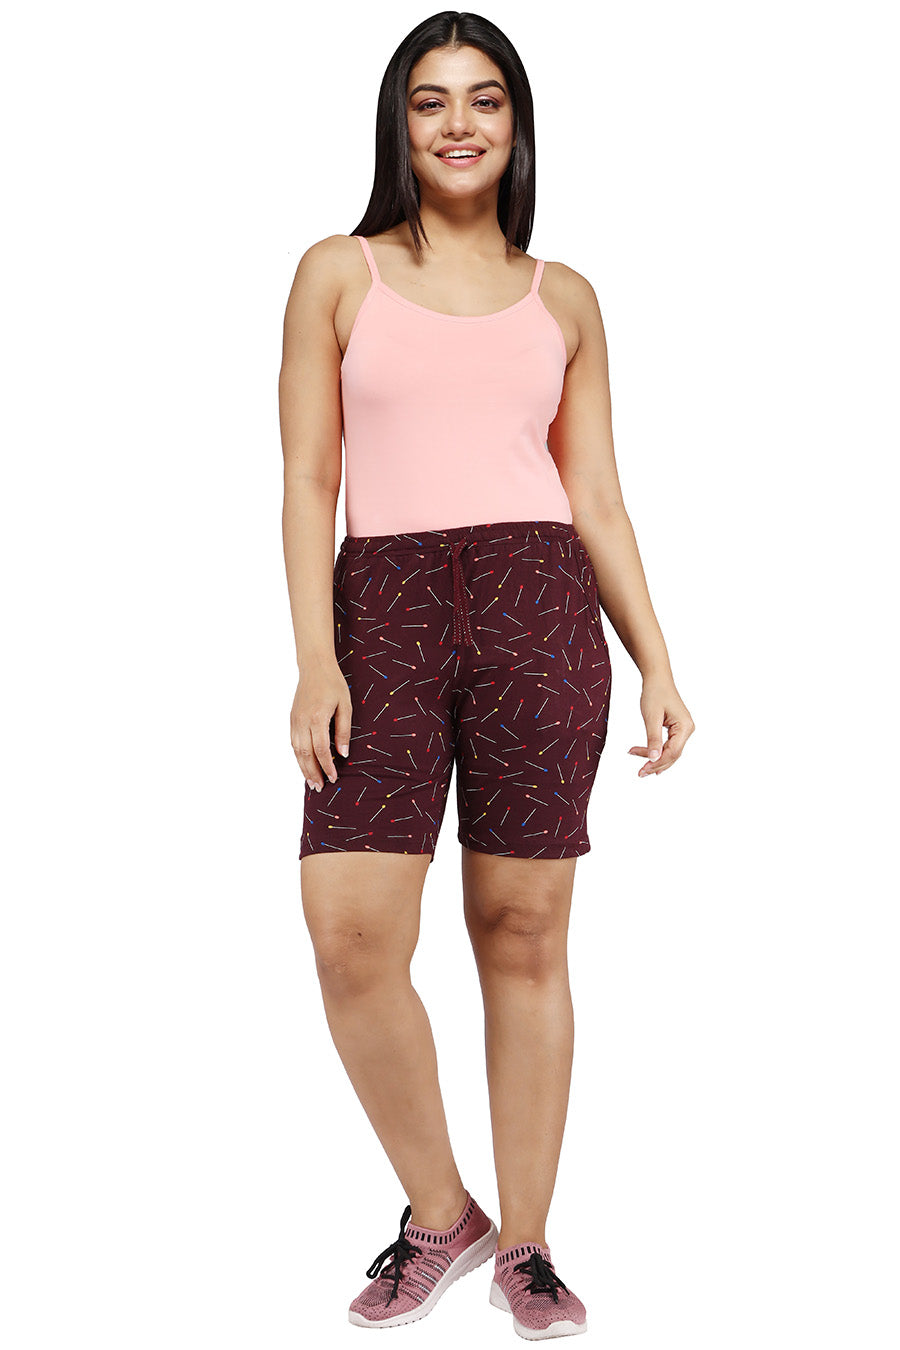 Comfrot Lady Printed Relax Shorts